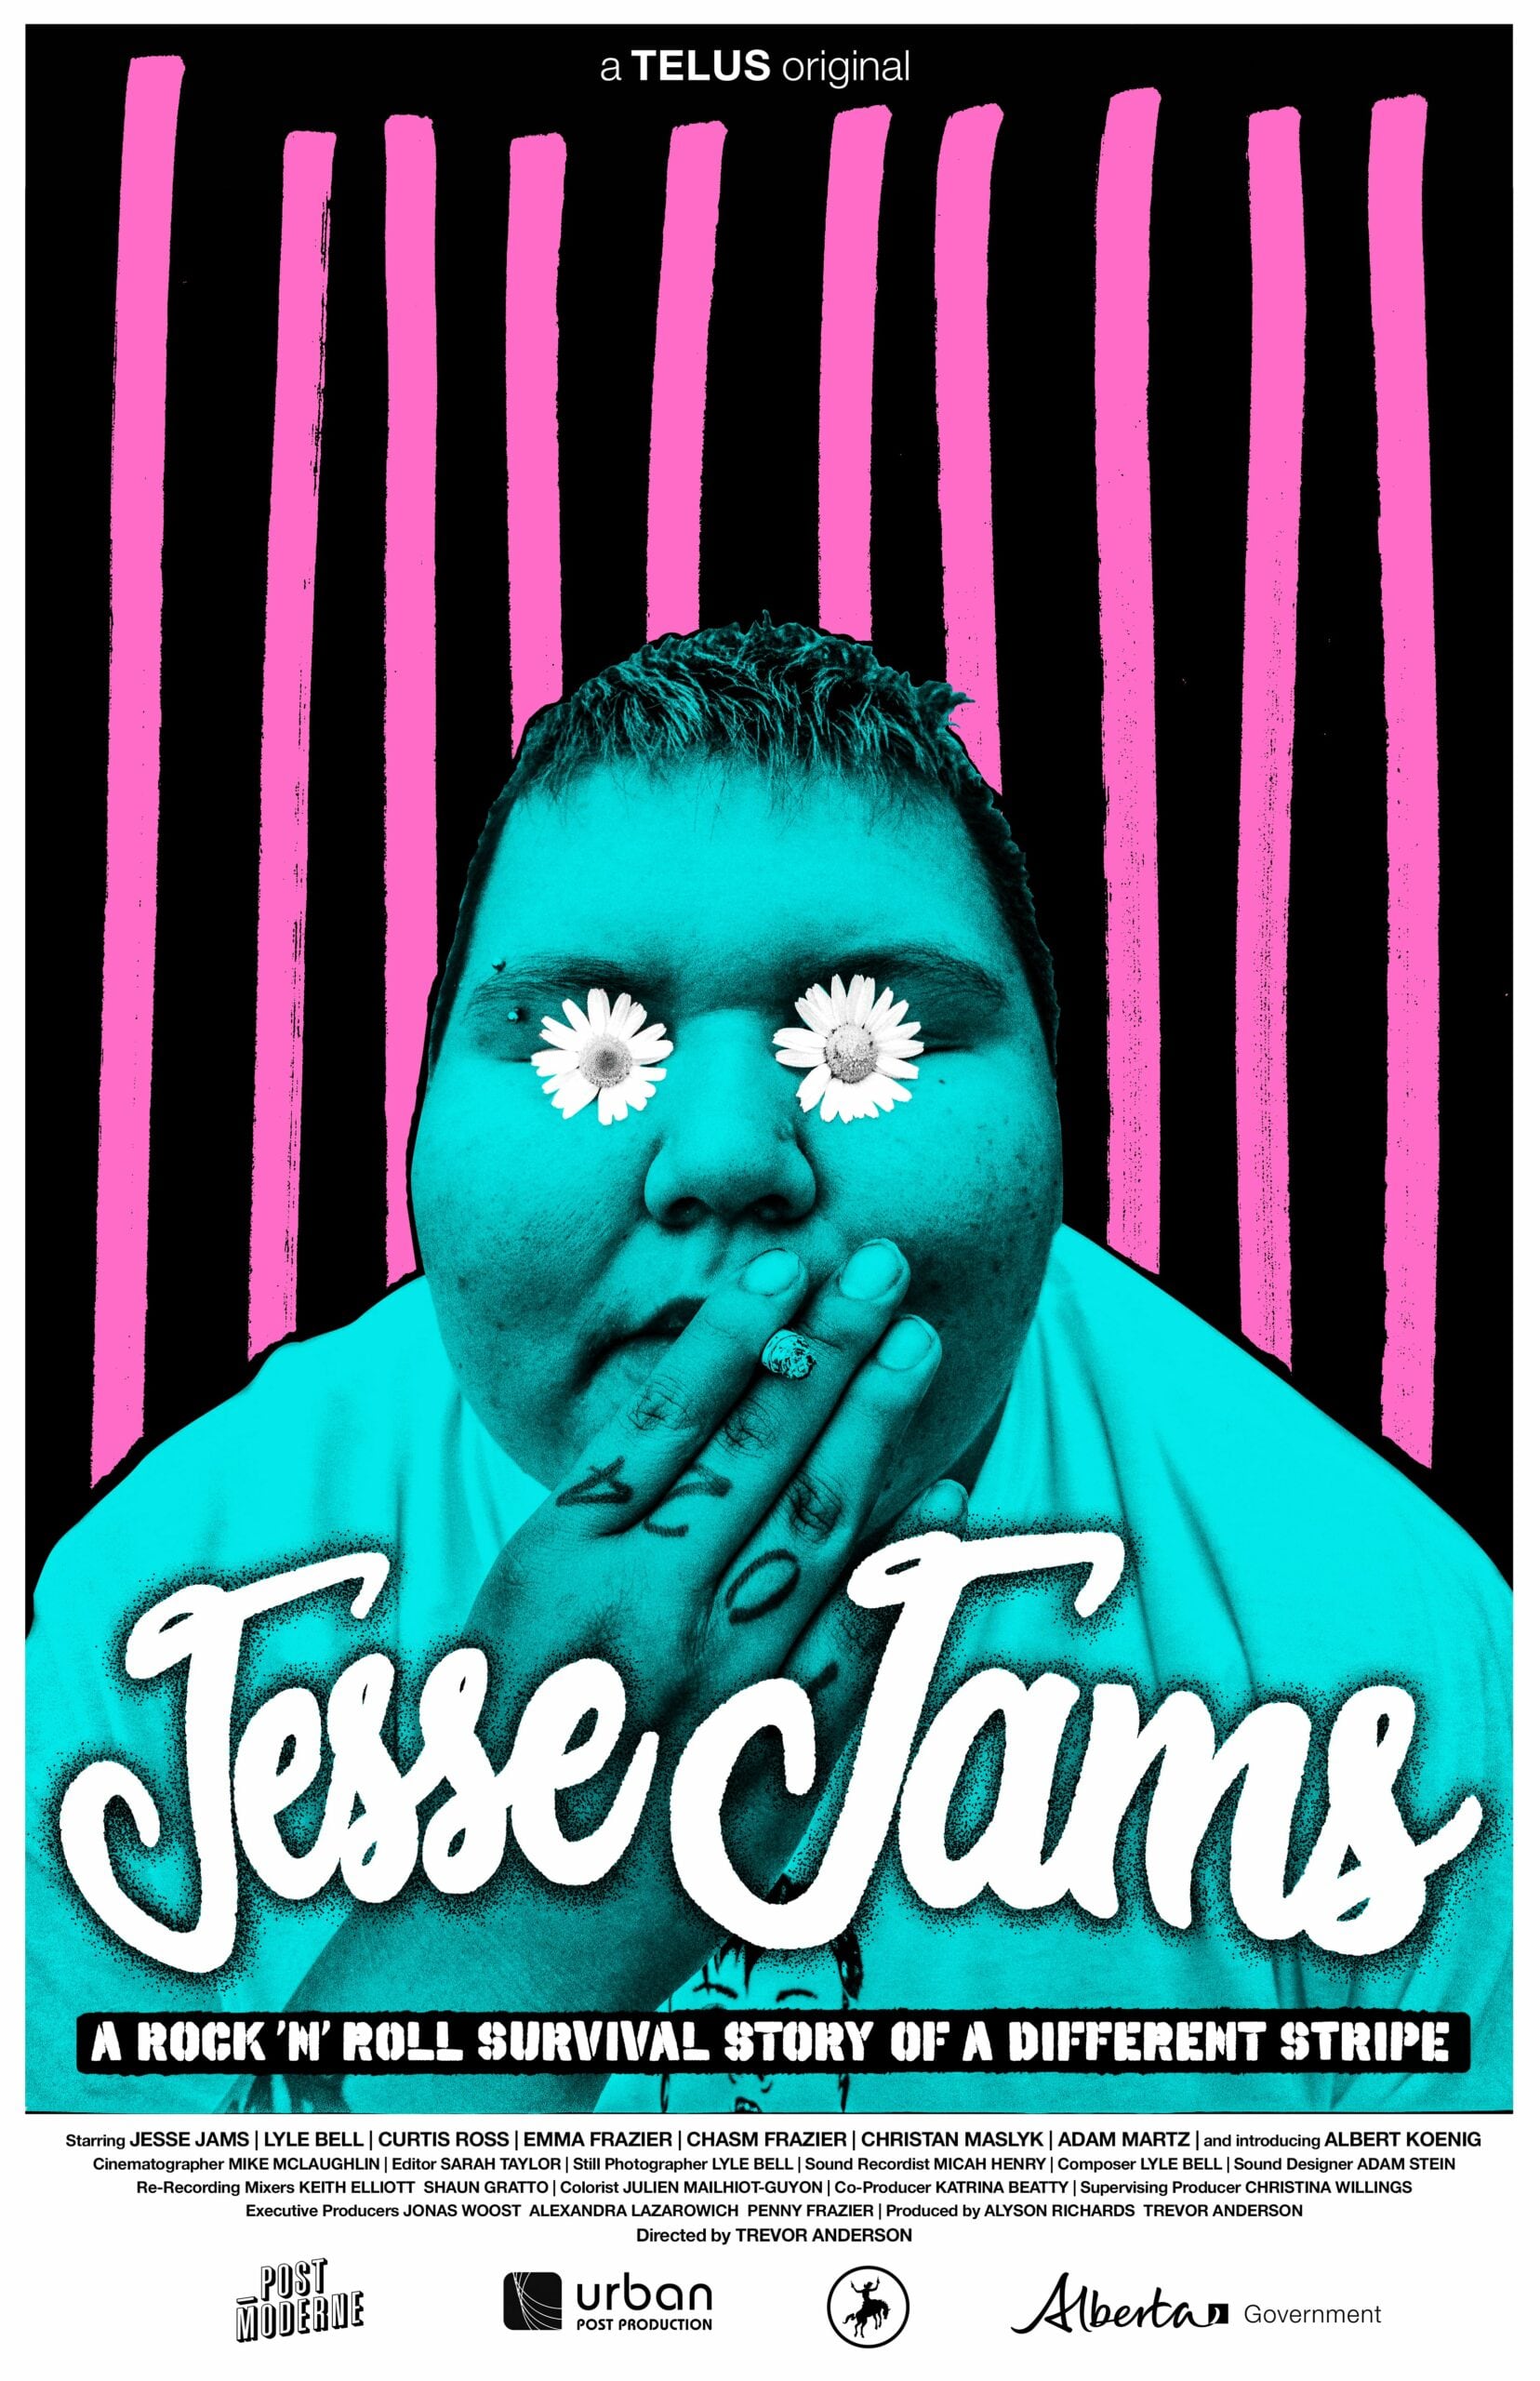 Film poster in pink, black and cyan of a person smoking with flowers pasted on their eyes